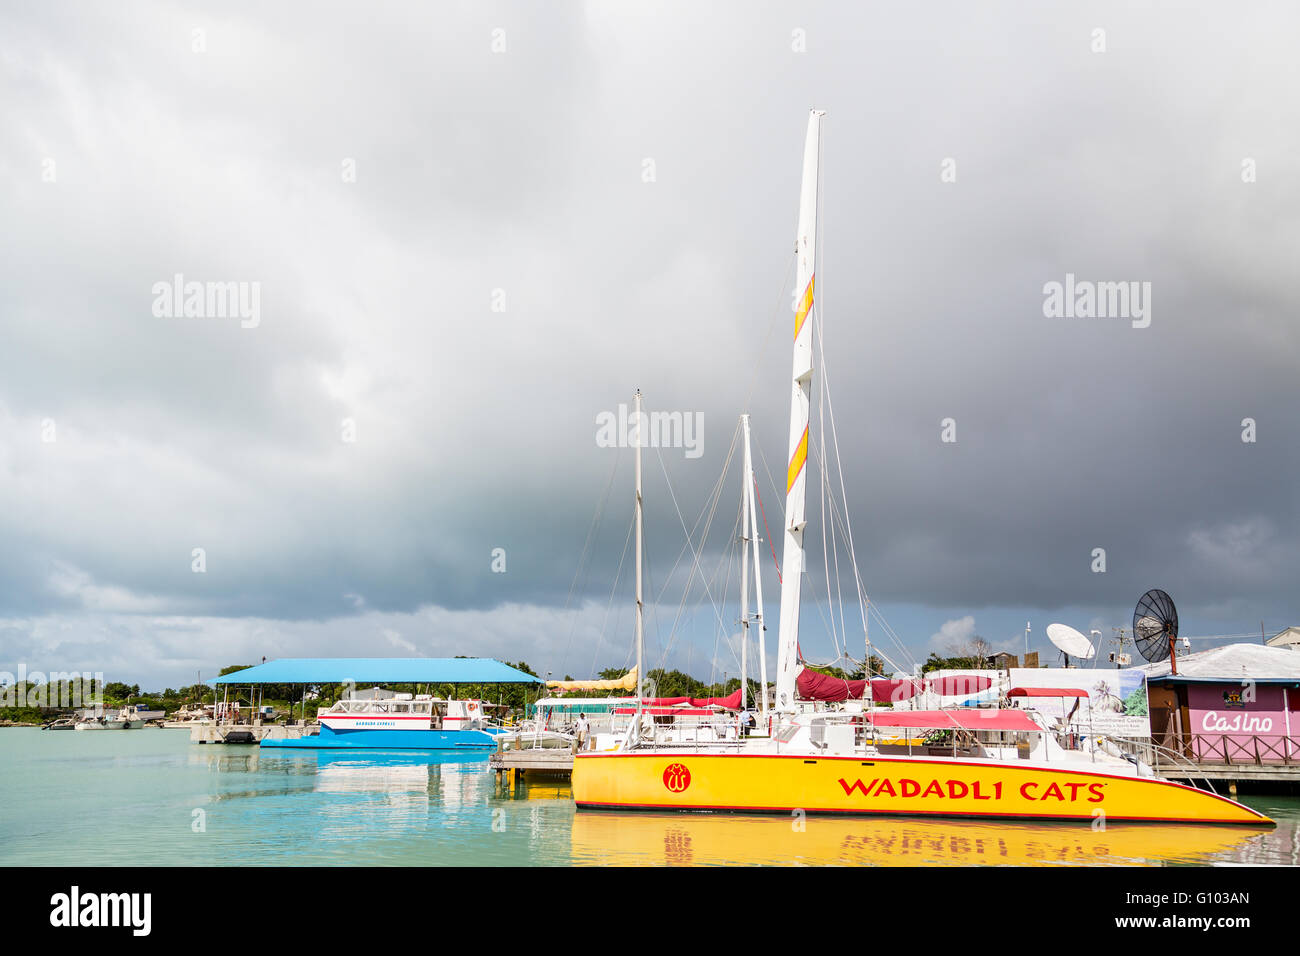 Wadaldi Cat Docked at Antigua with tour boats Stock Photo